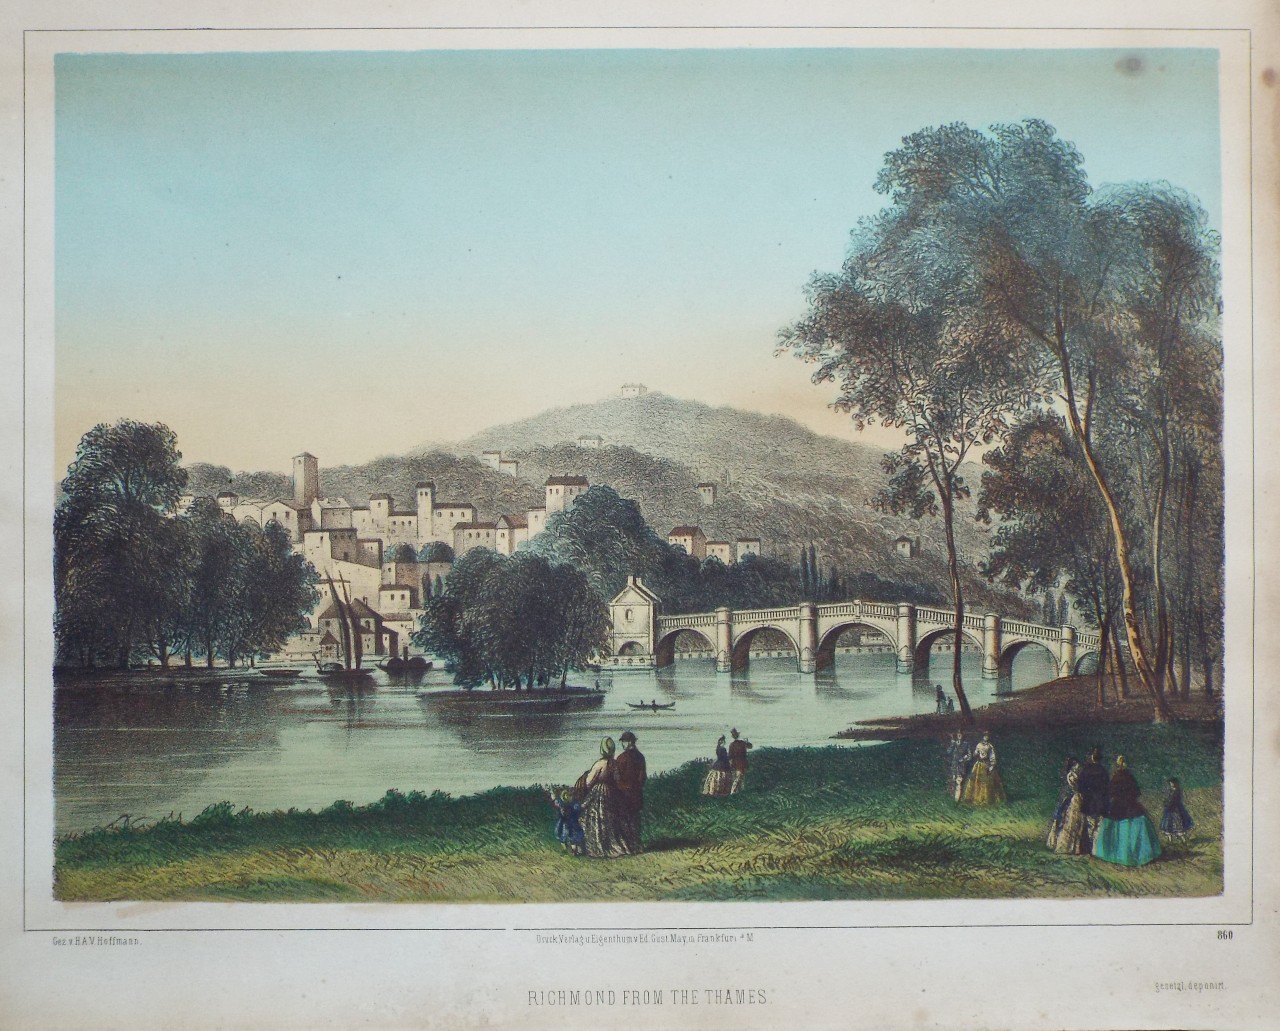 Lithograph - Richmond from the Thames.